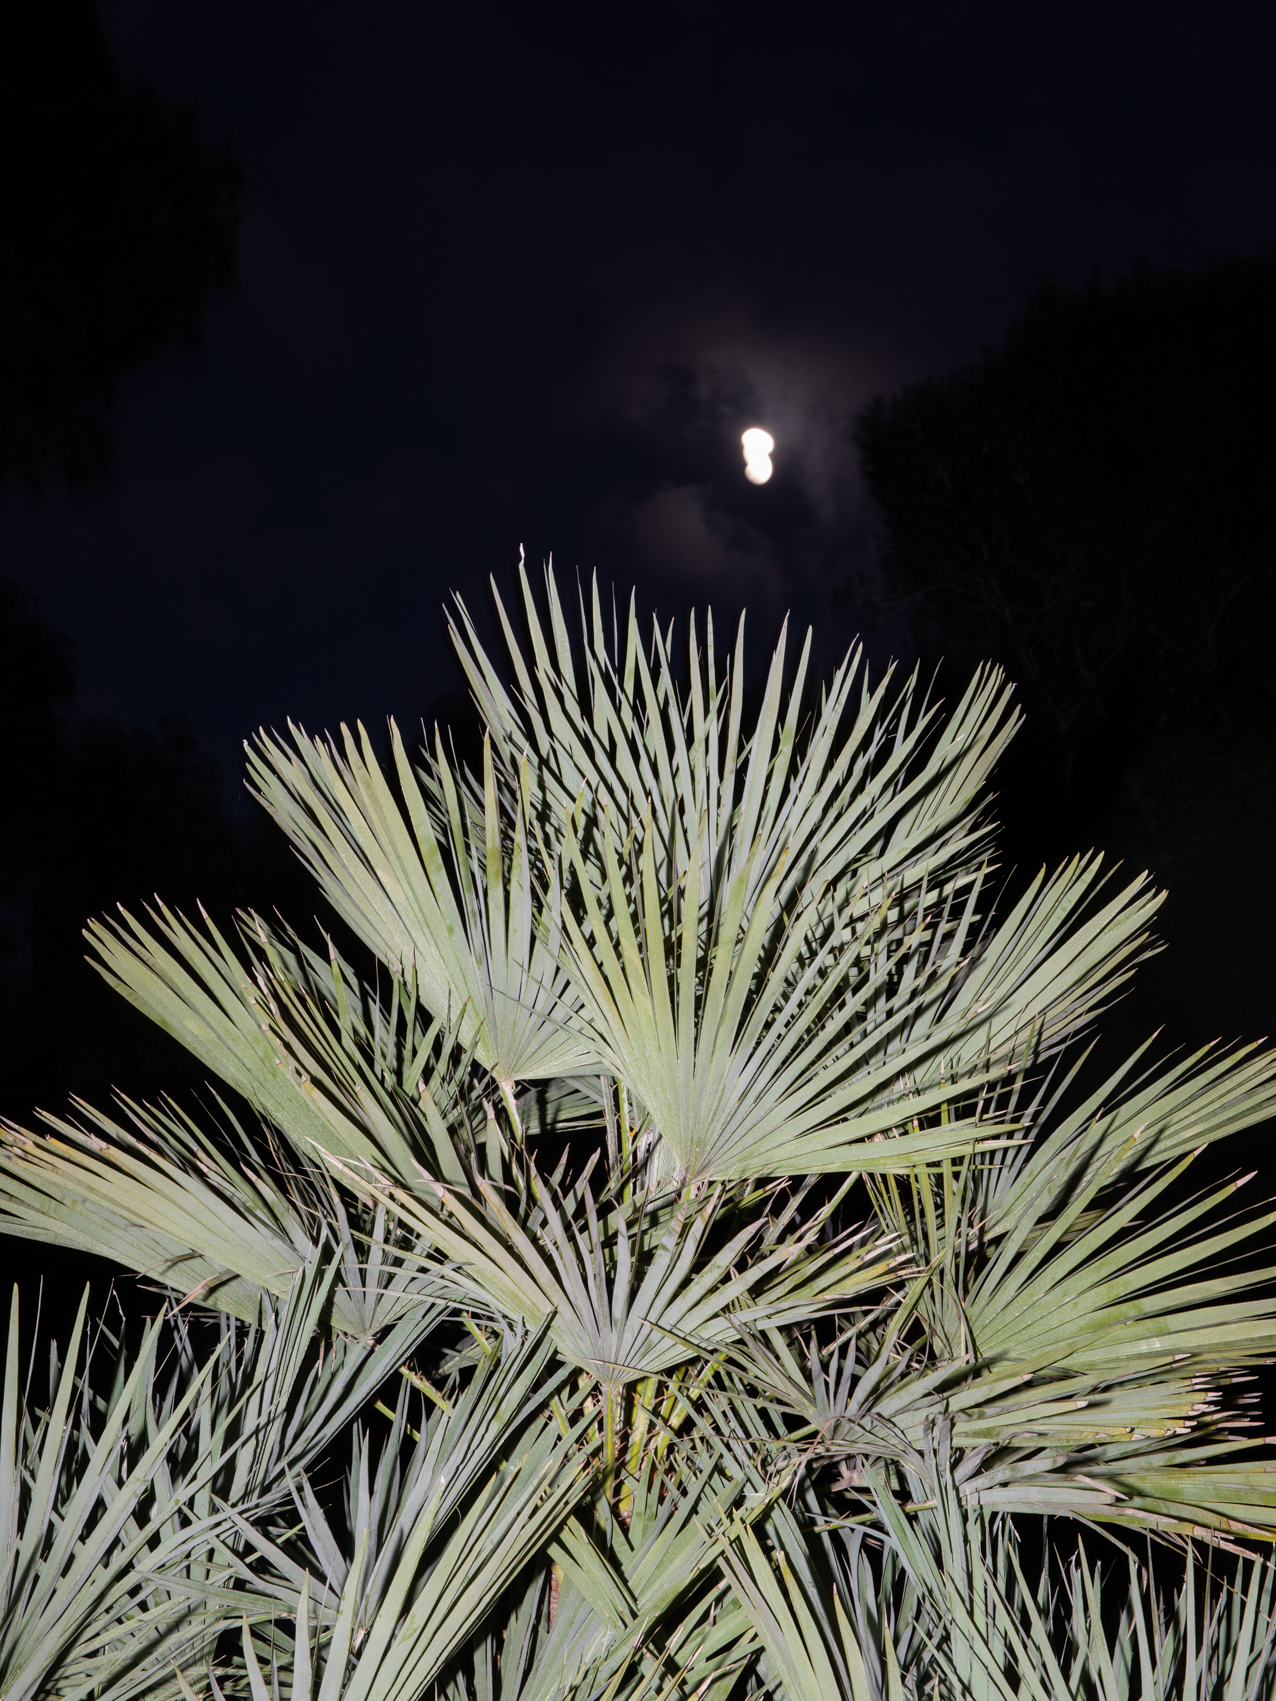 DOUBLE MOON AND PALM TREES